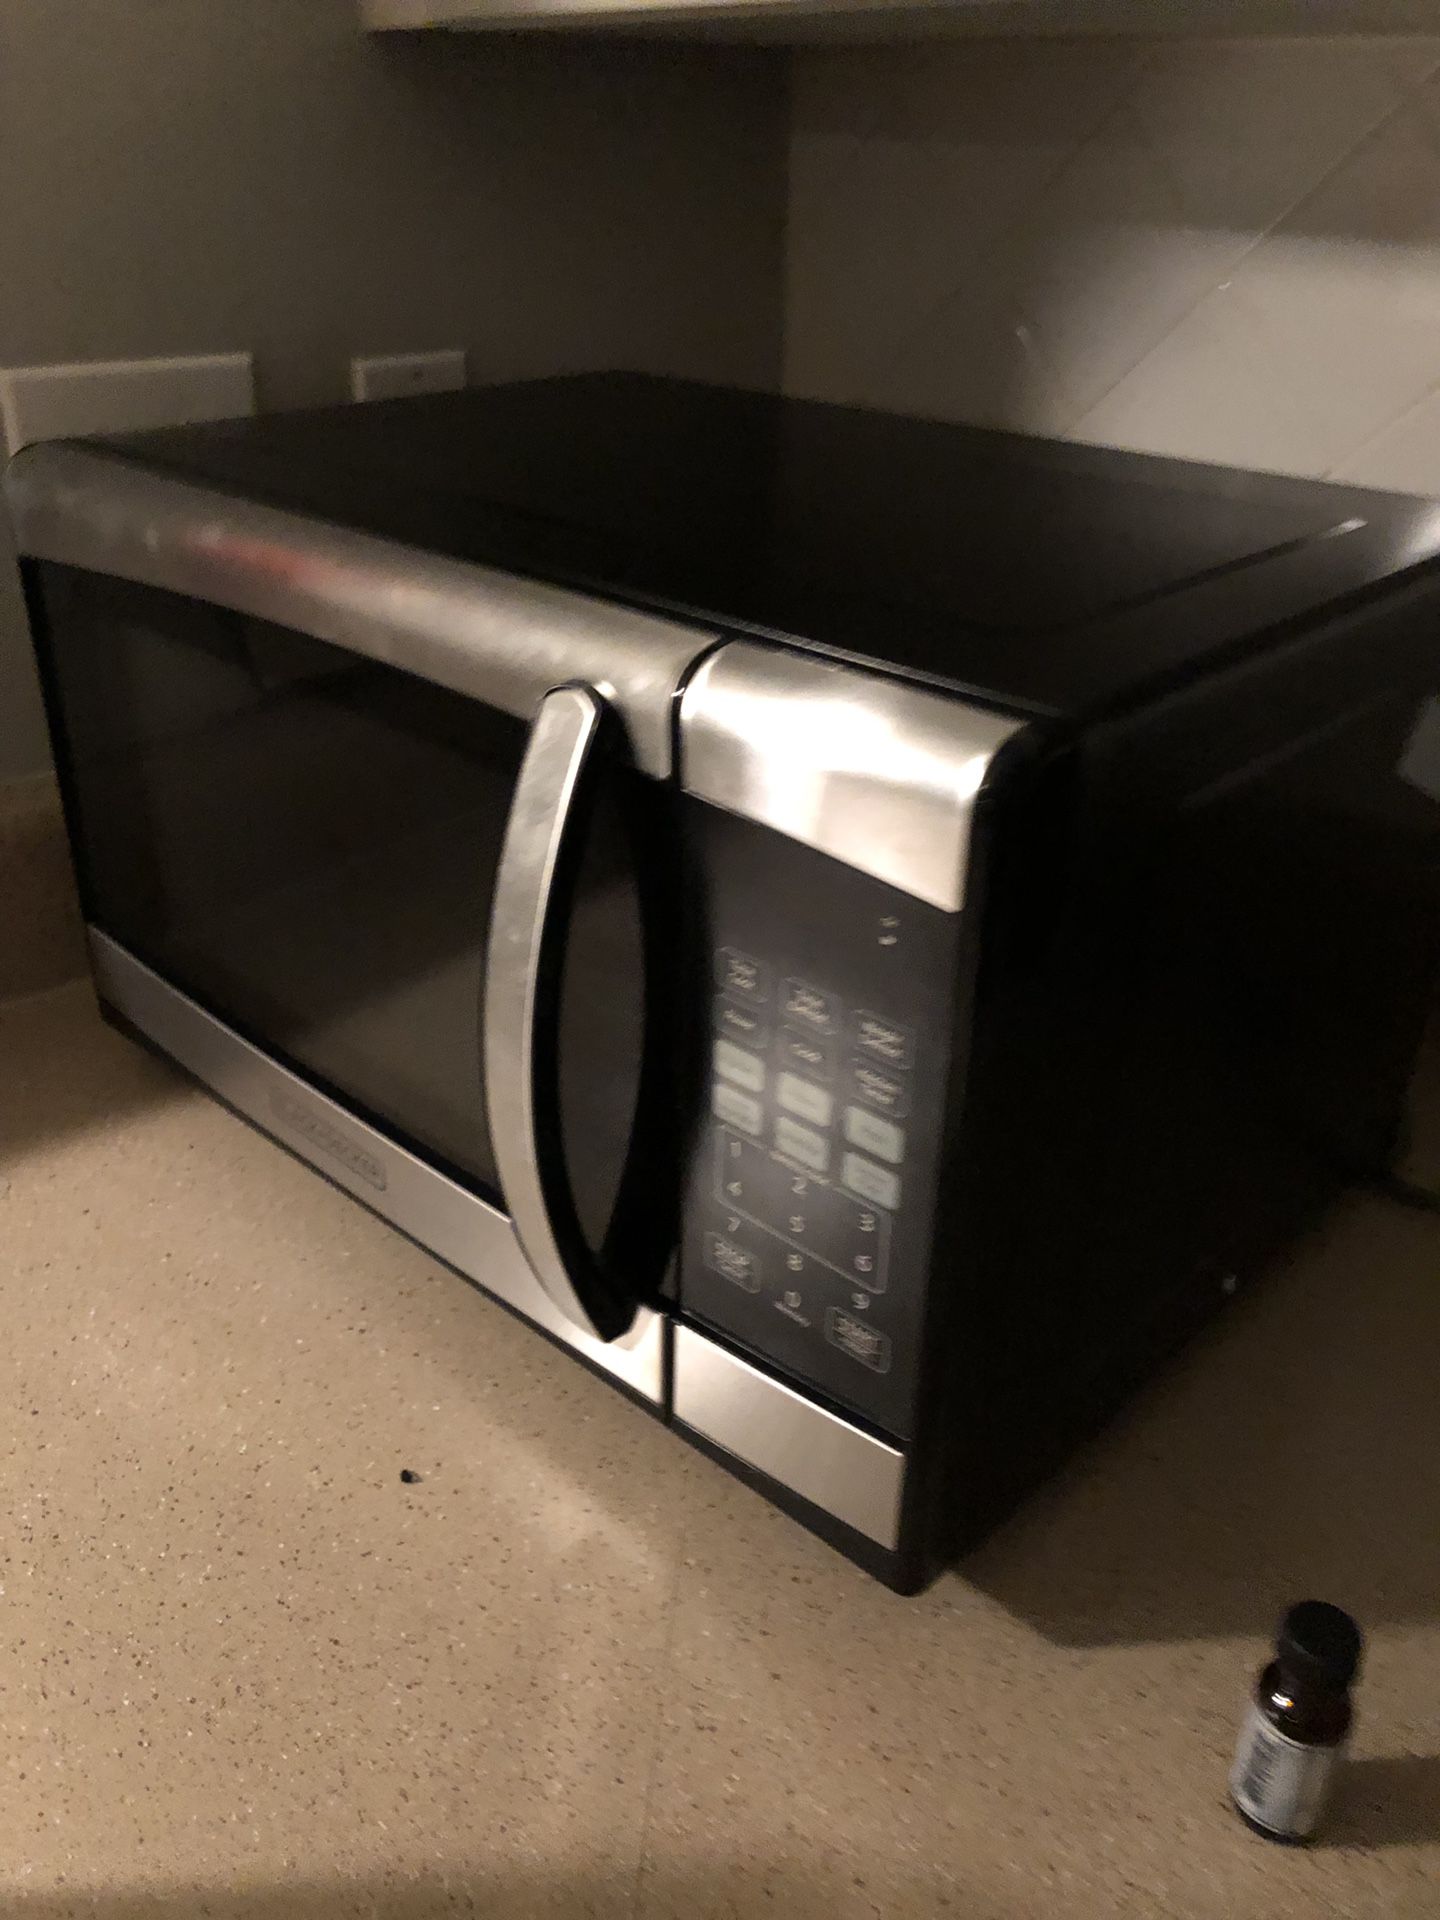 Black and decker microwave like new